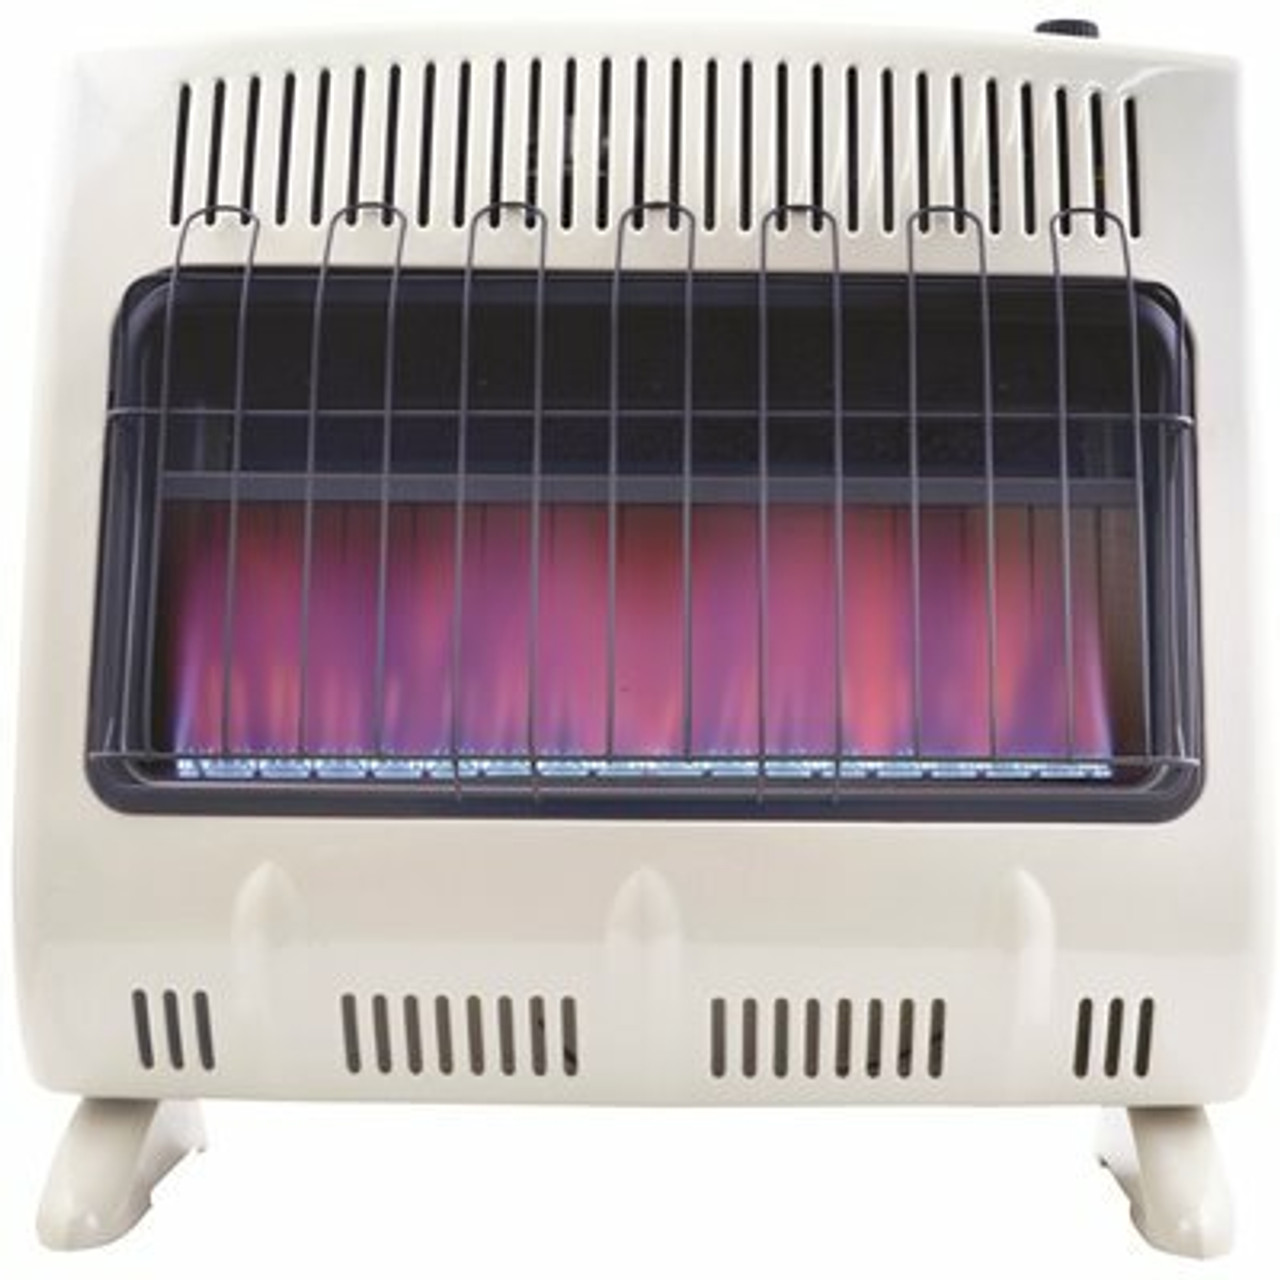 Heatstar 30,000 Btu Vent-Free Blue Flame Propane Heater With Thermostat And Blower